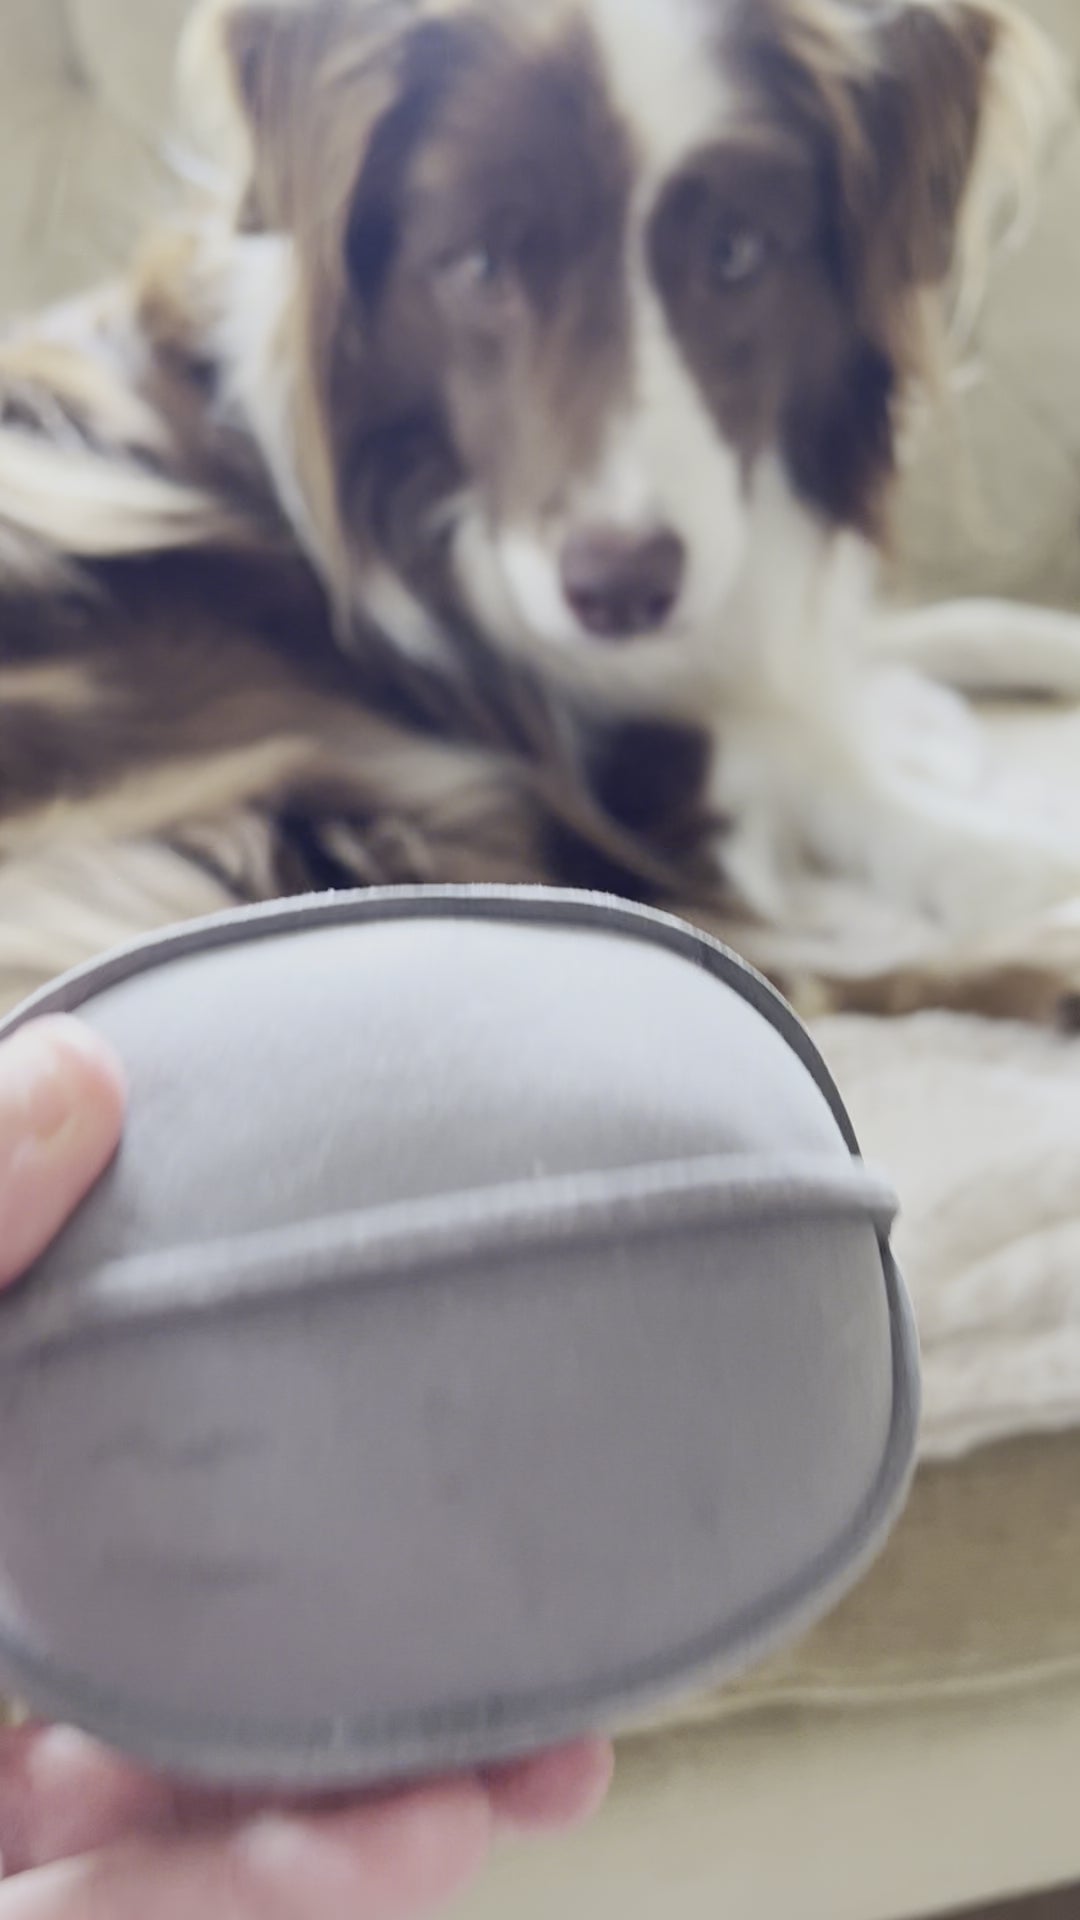 video of border collie with grey suede indoor play ball dog toy by border loves